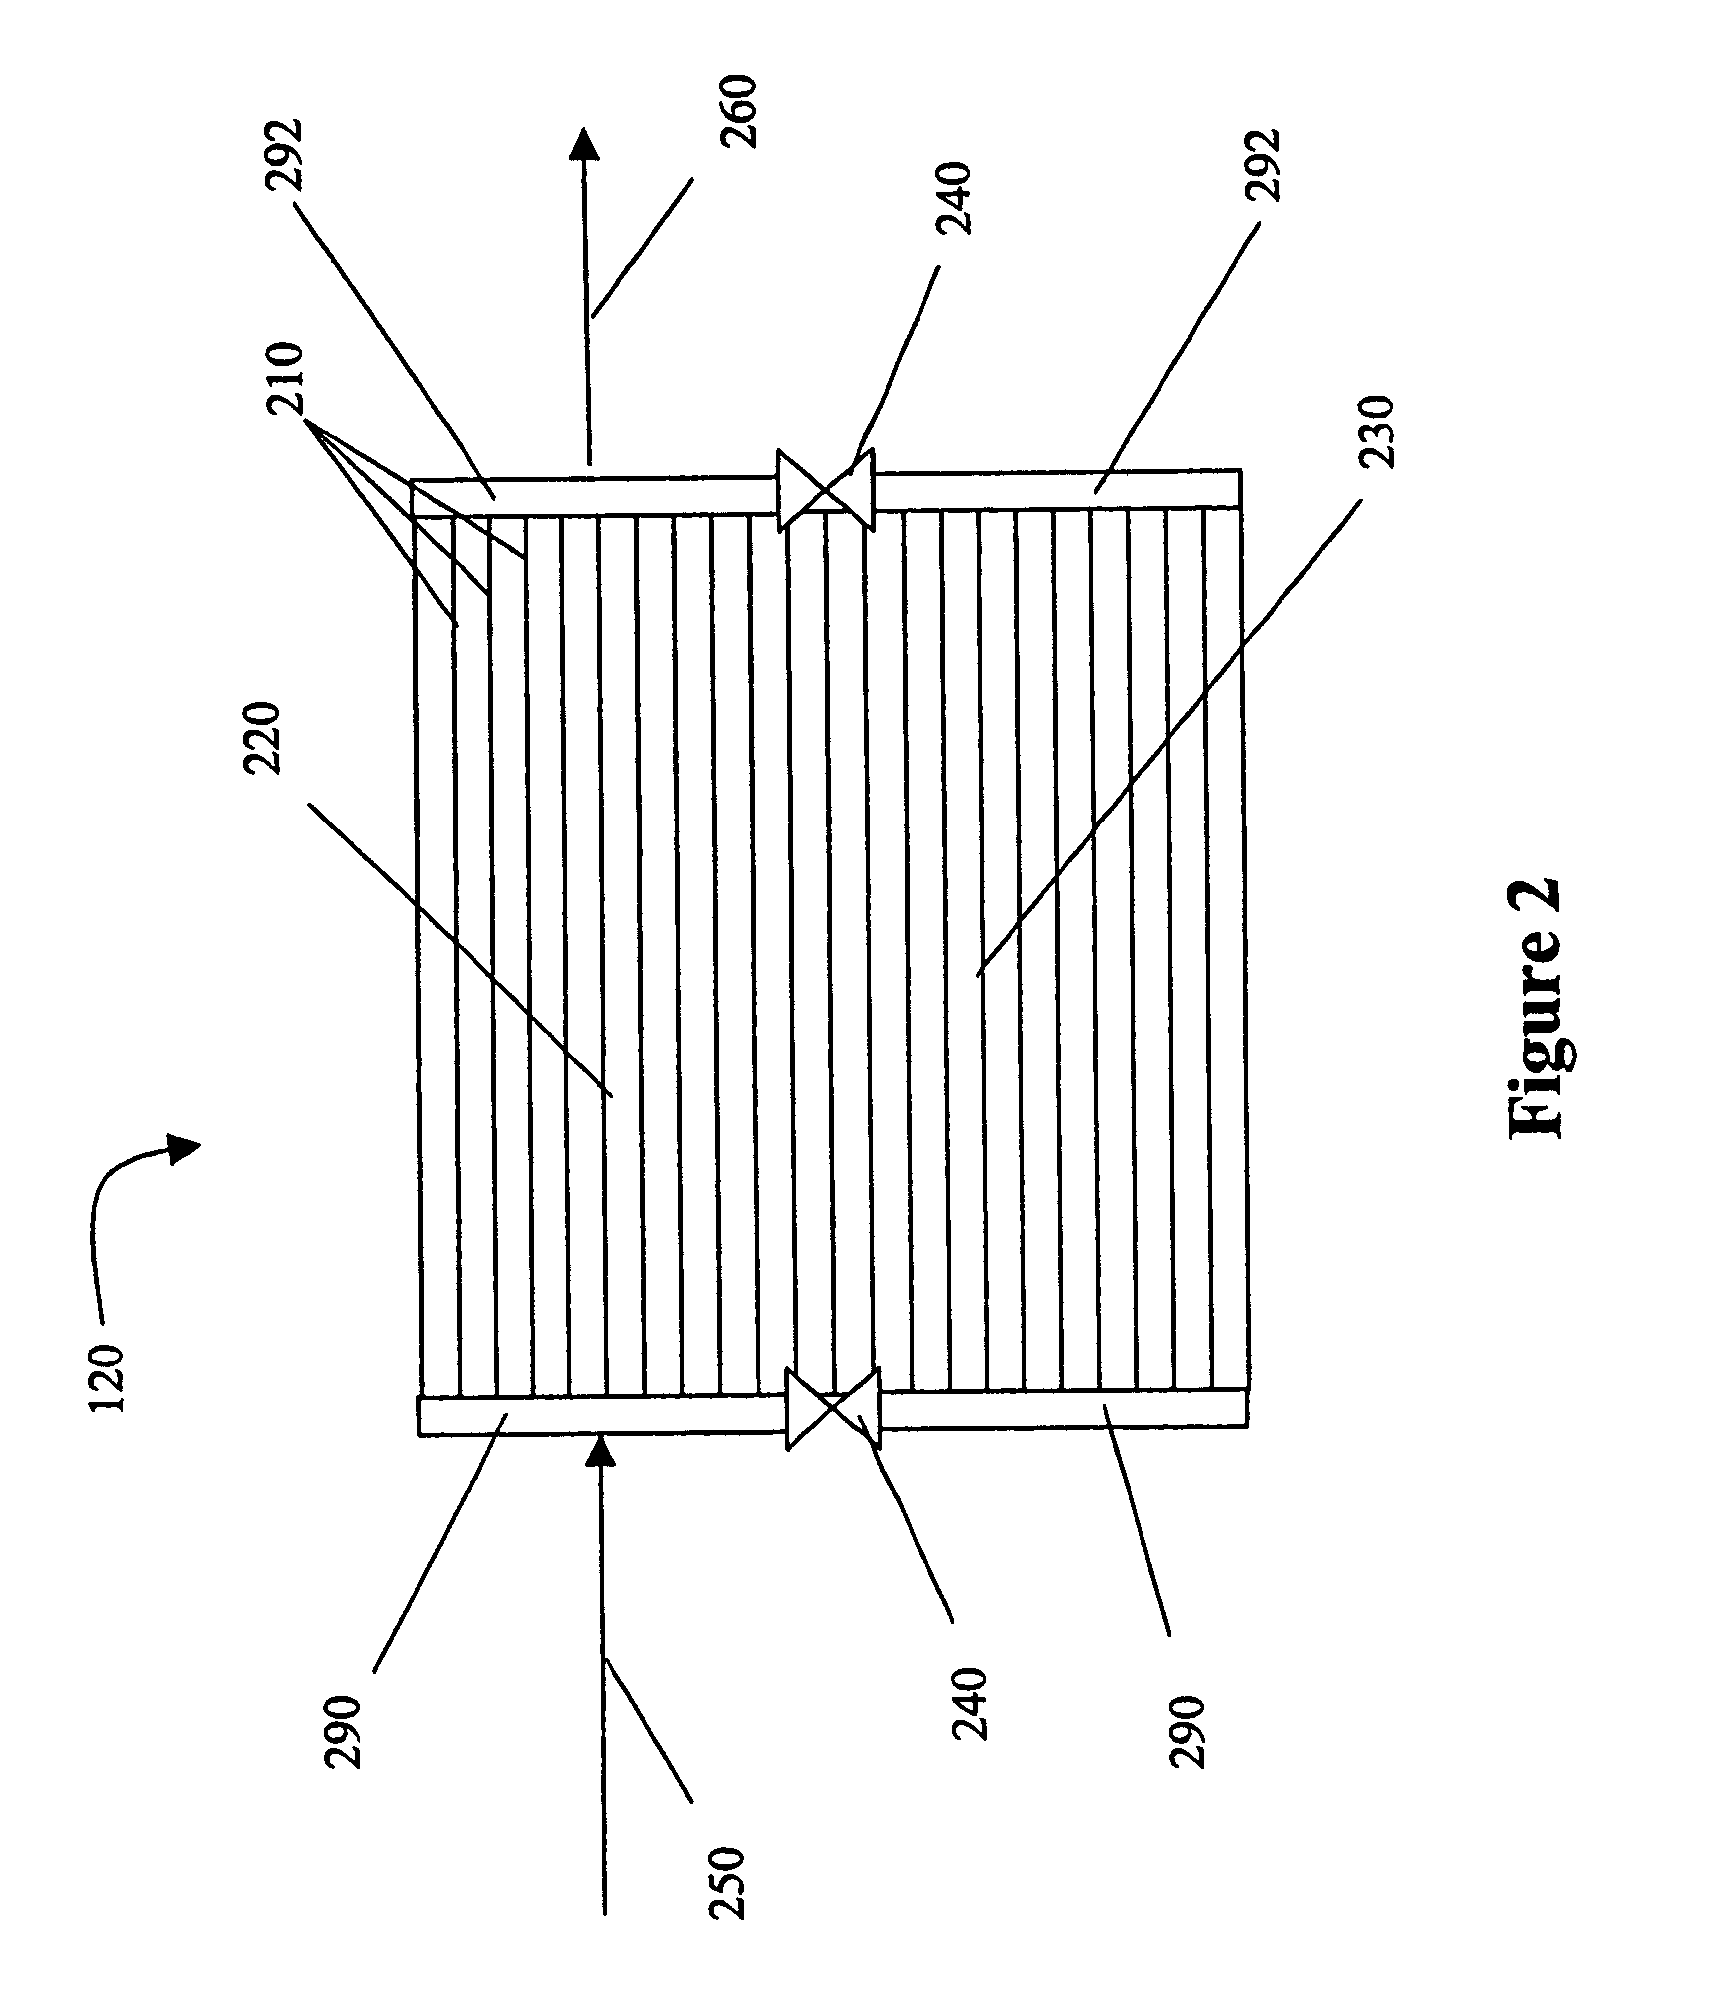 Method for refrigerant pressure control in refrigeration systems